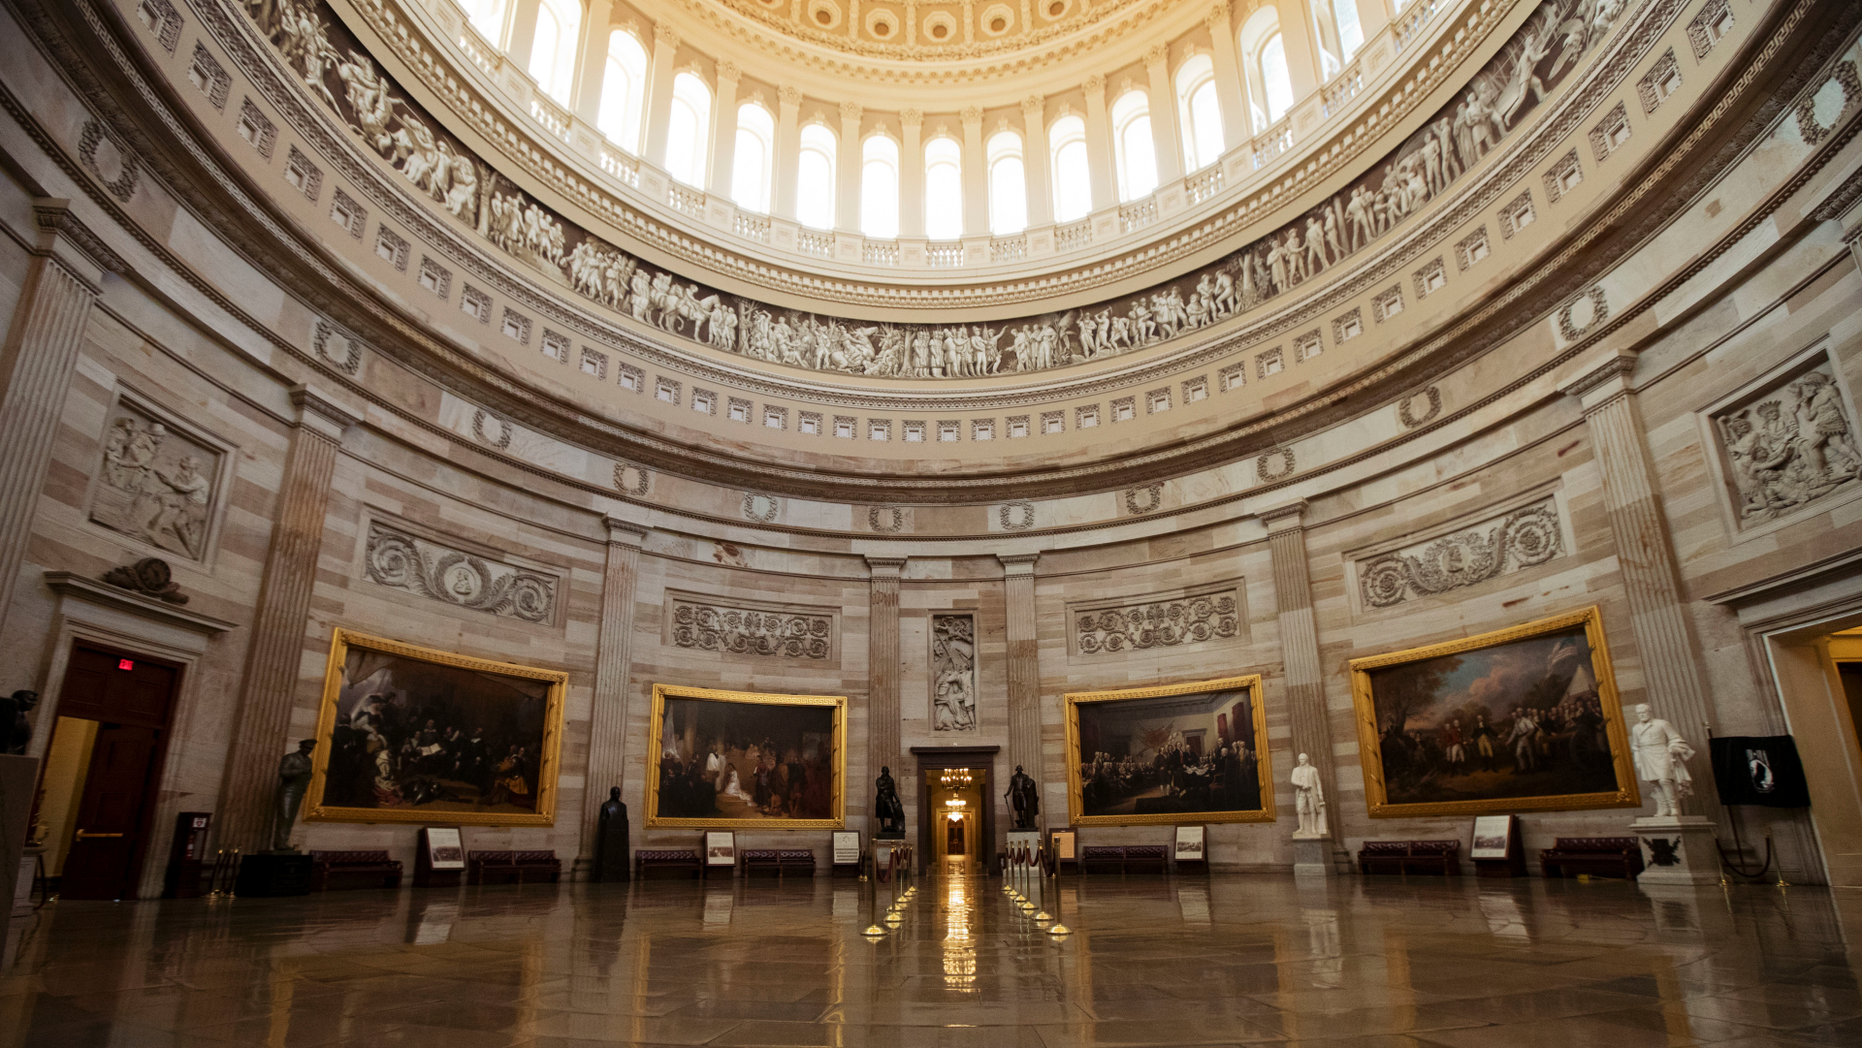 The empty U.S. Capitol Rotunda is seen during a partial government shutdown in Washington, Monday, Dec. 24, 2018. Both sides in the long-running fight over funding President Donald Trump's U.S.-Mexico border wall appear to have moved toward each other, but a shutdown of one-fourth of the federal government entered Christmas without a clear resolution in sight. (AP Photo/Manuel Balce Ceneta)